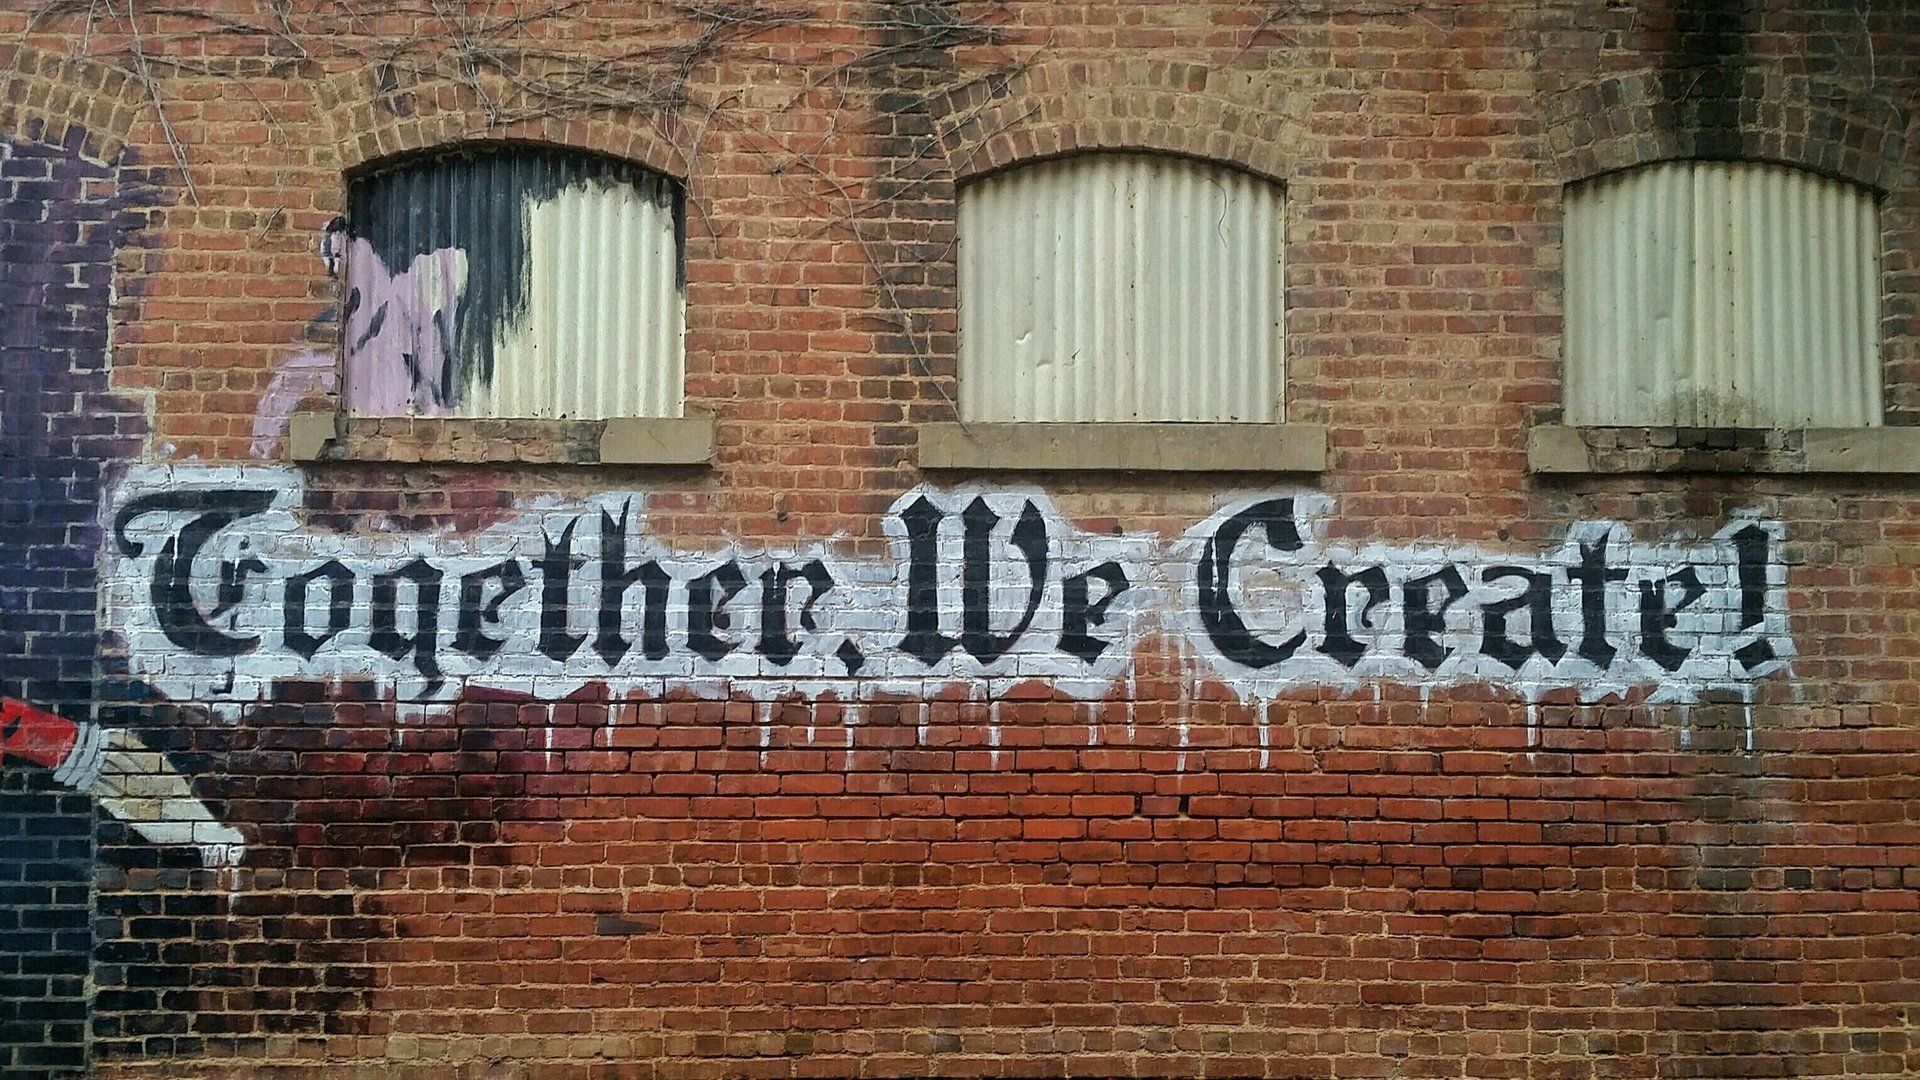 a brick wall with graffiti on it that says together we create